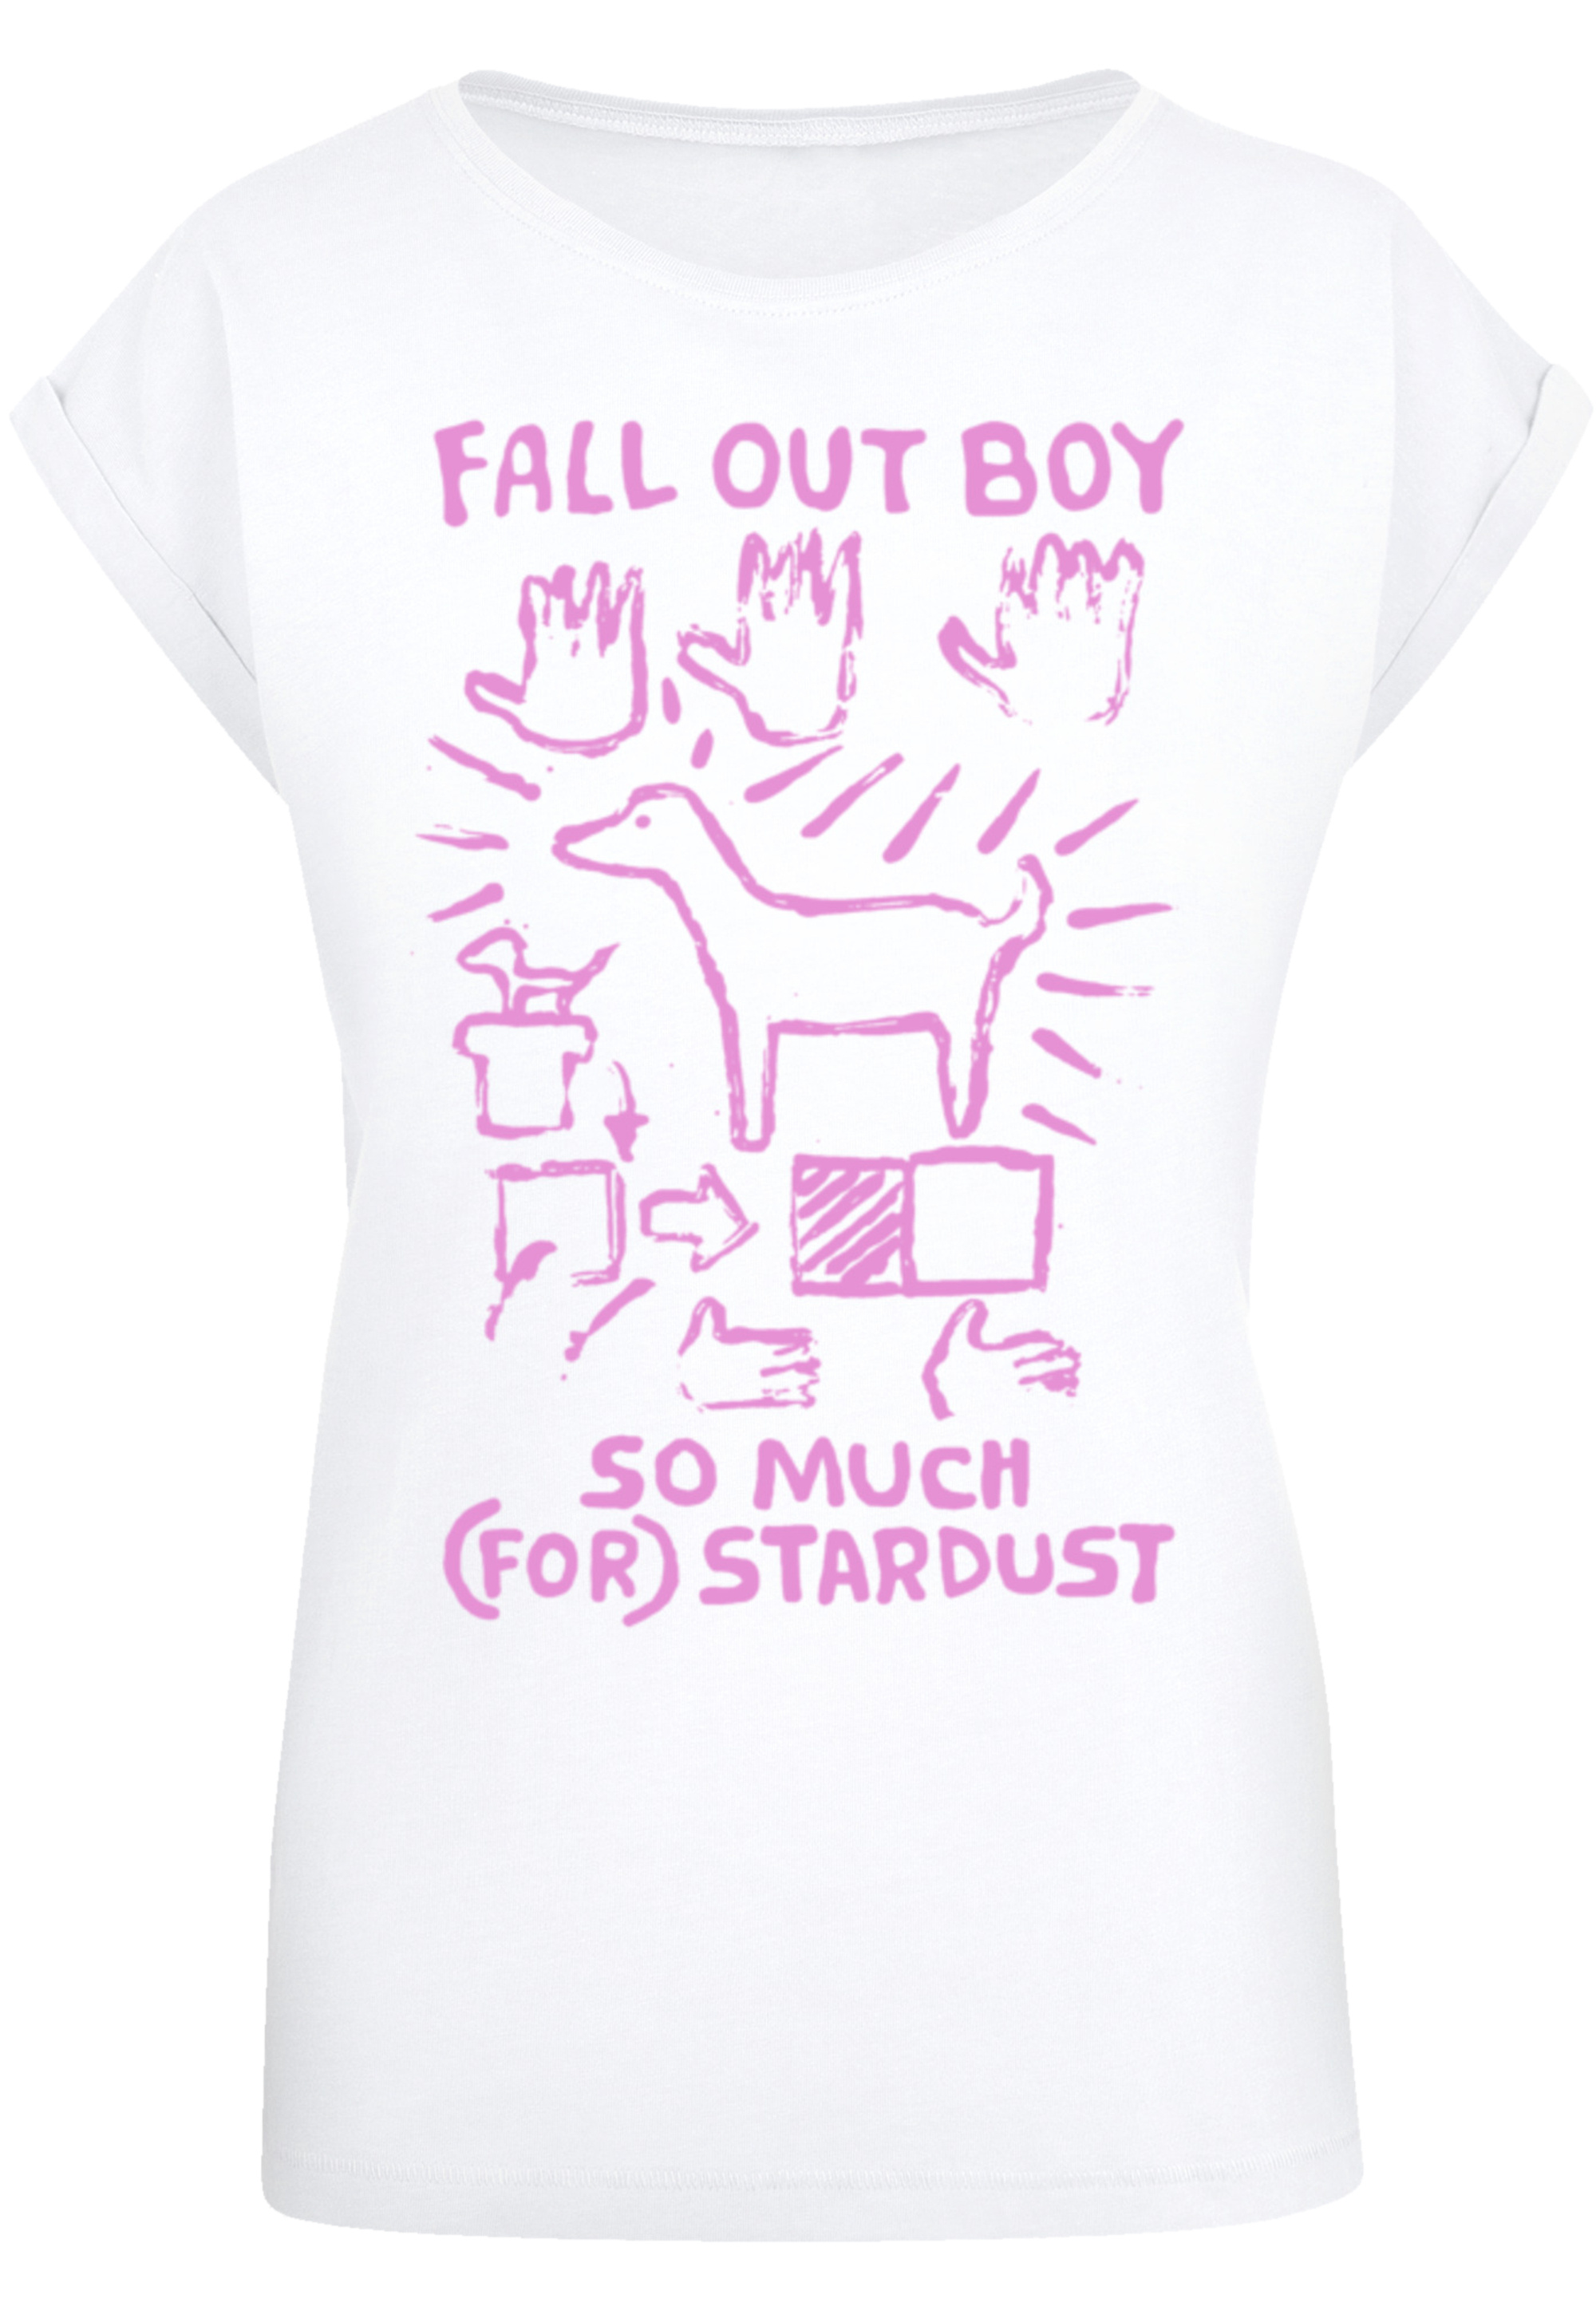 виниловая пластинка universal music fall out boy so much for stardust Футболка F4NT4STIC Fall Out Boy Pink Dog So Much Stardust, белый